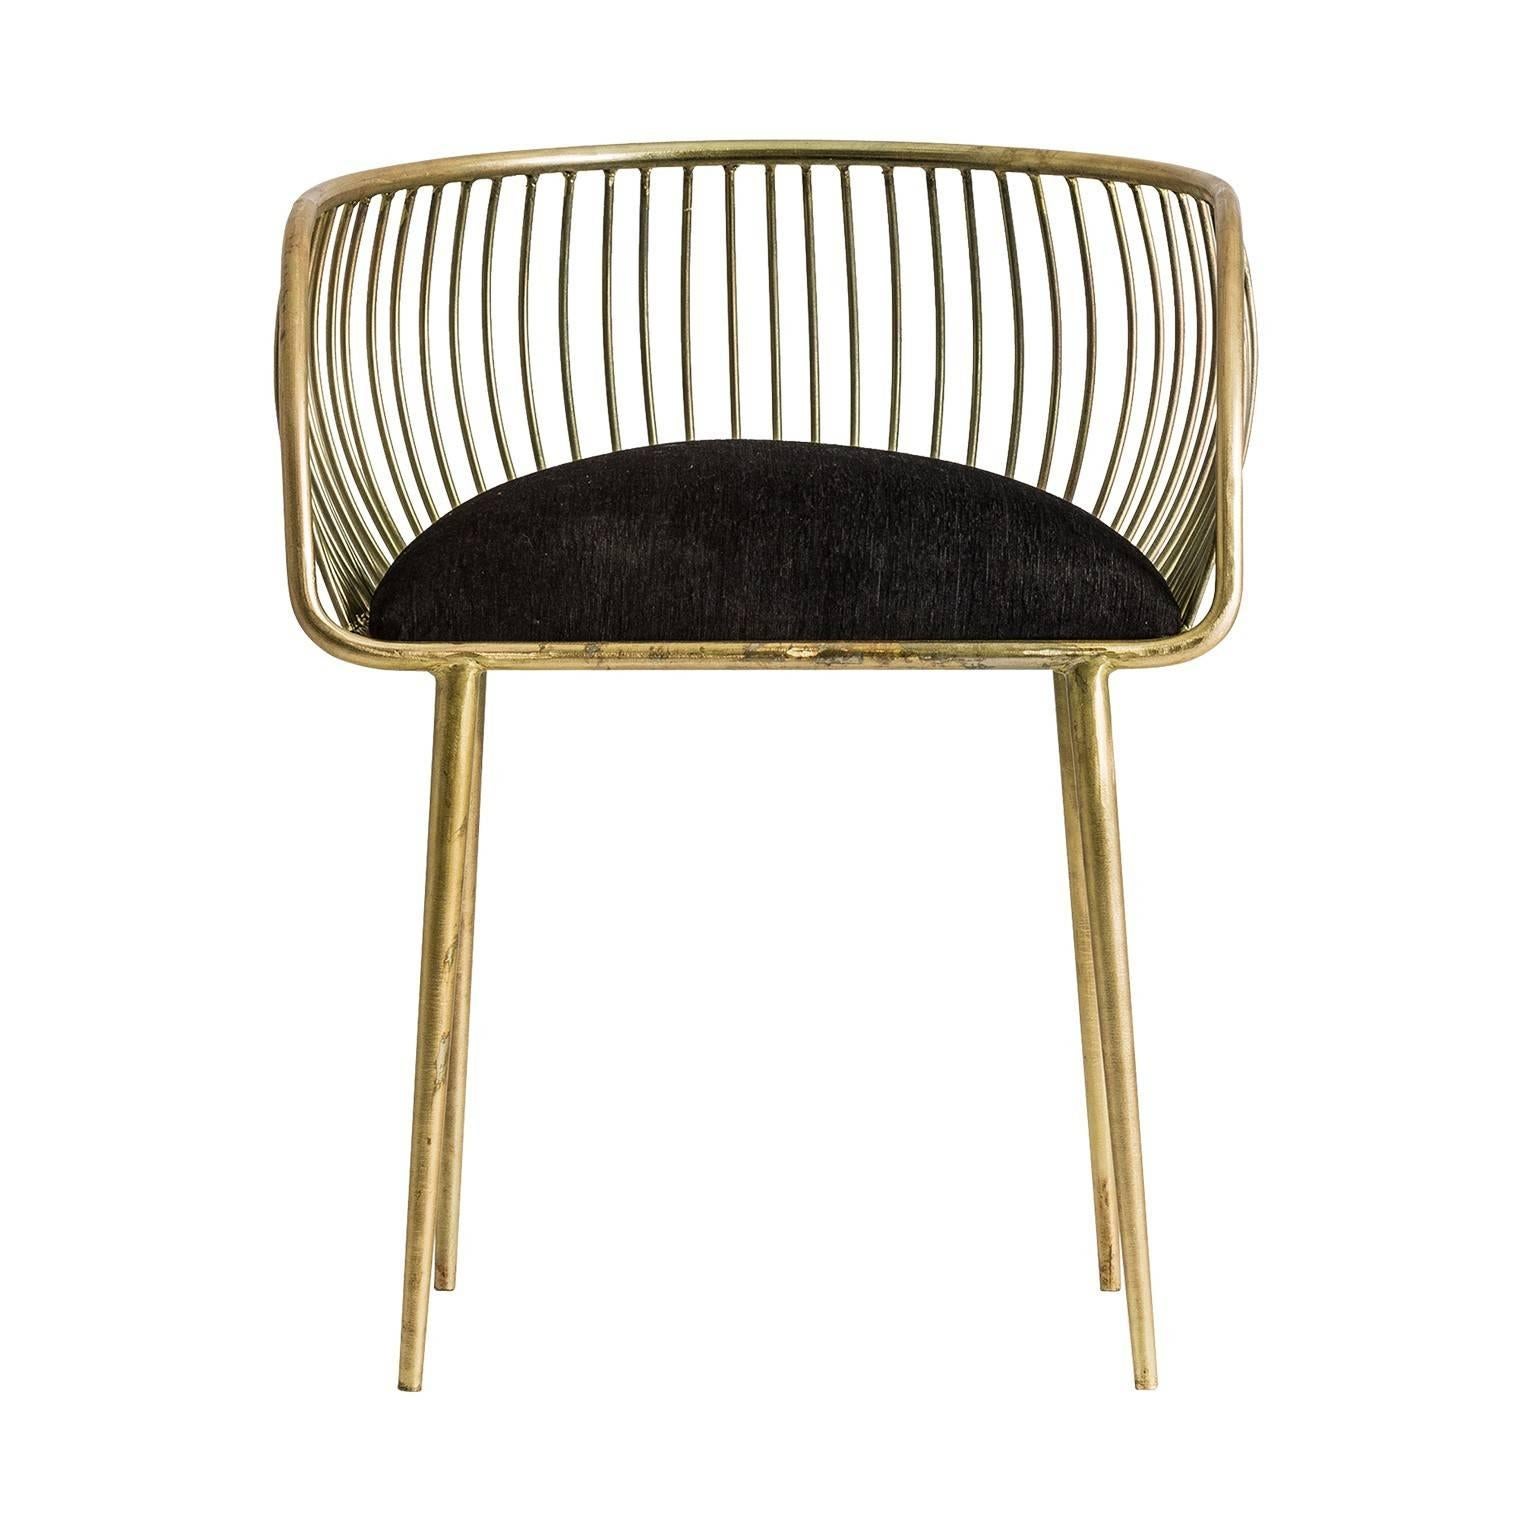 Gold Patina effect and black fabric armchair, outstanding shape, comfortable, and so trendy!